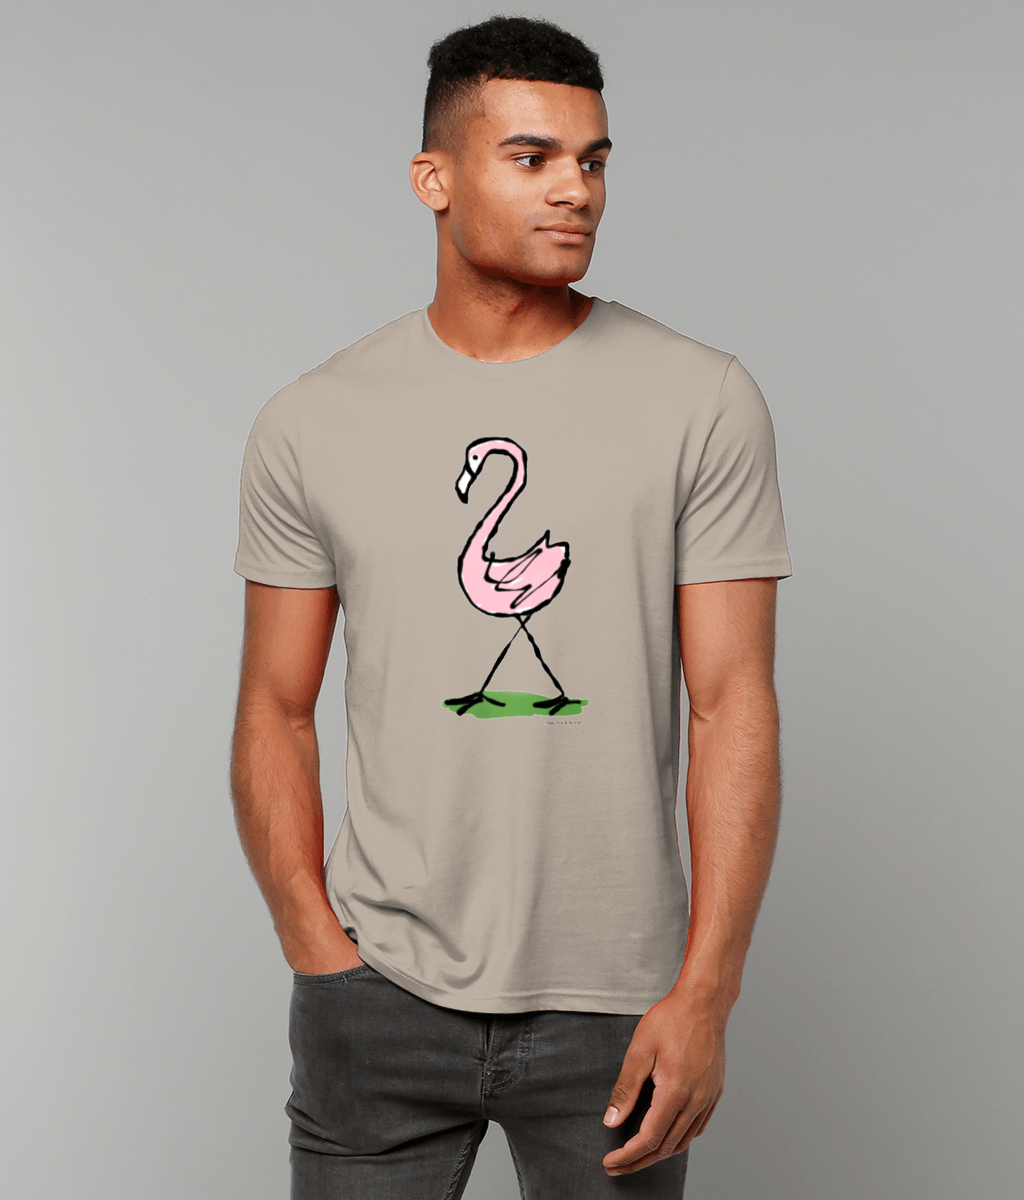 Pink Flamingo T-shirt - Young man wearing an illustrated flamingo t-shirt design on sand colour tee by Hector and Bone